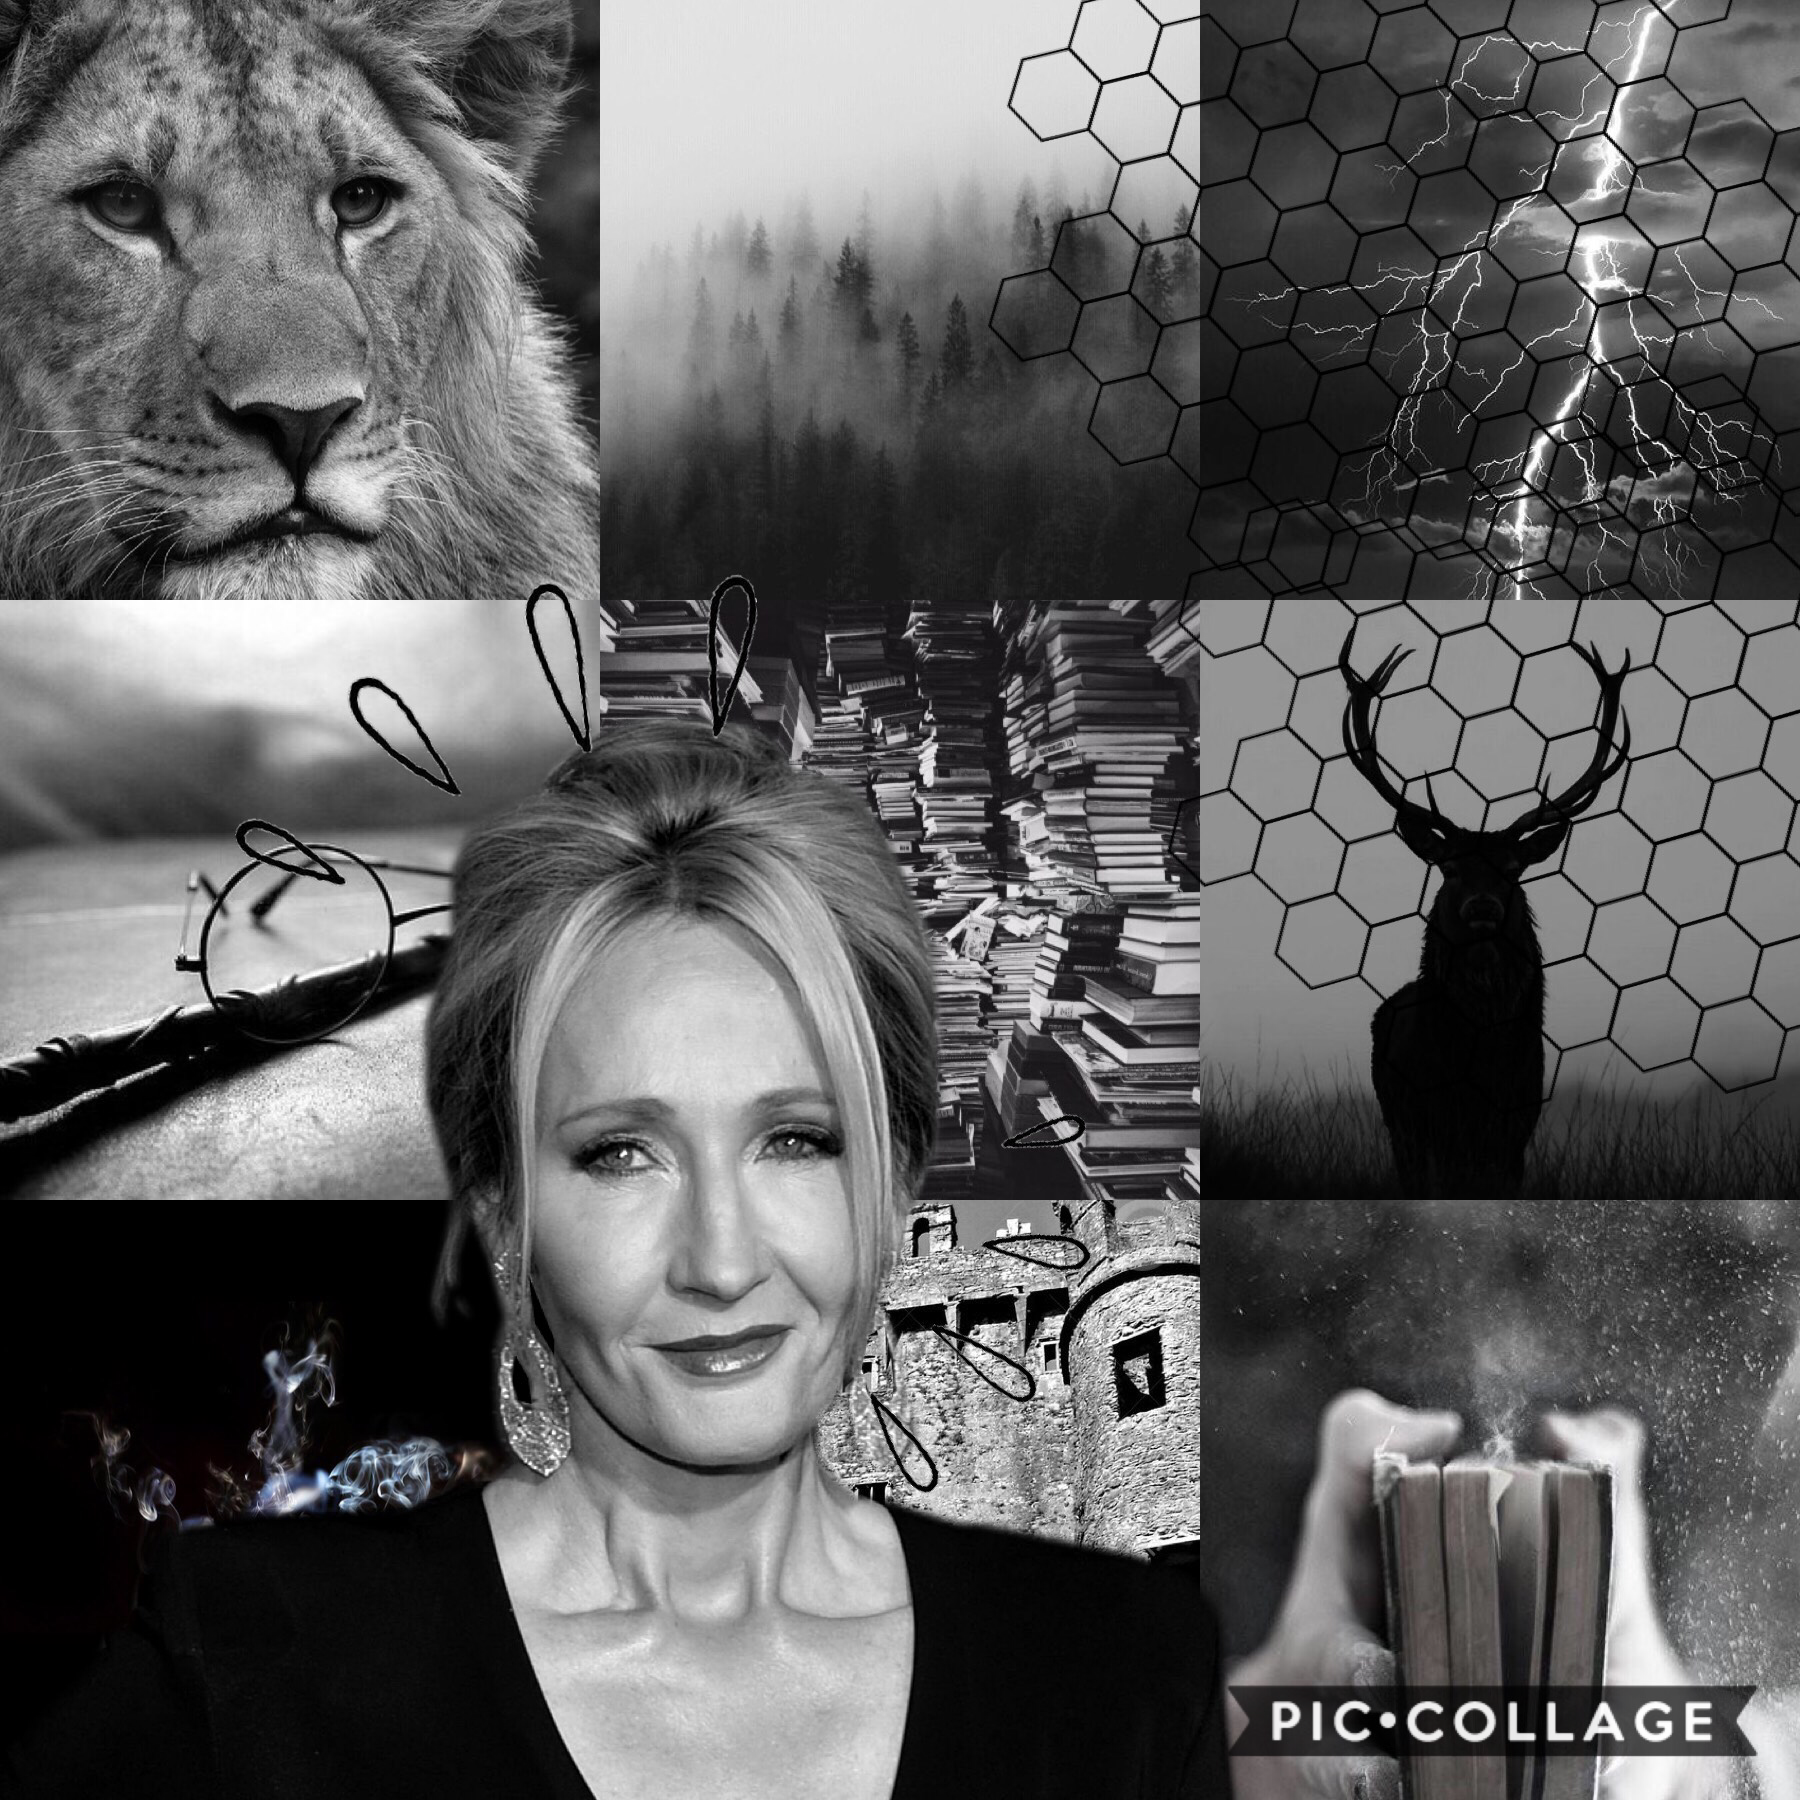 Tap🖤
Hey guys! I’m back! Here’s a quick little edit of the queen! 🖤
Qotd: Favorite author?
Aotd: JK Rowling🖤duh